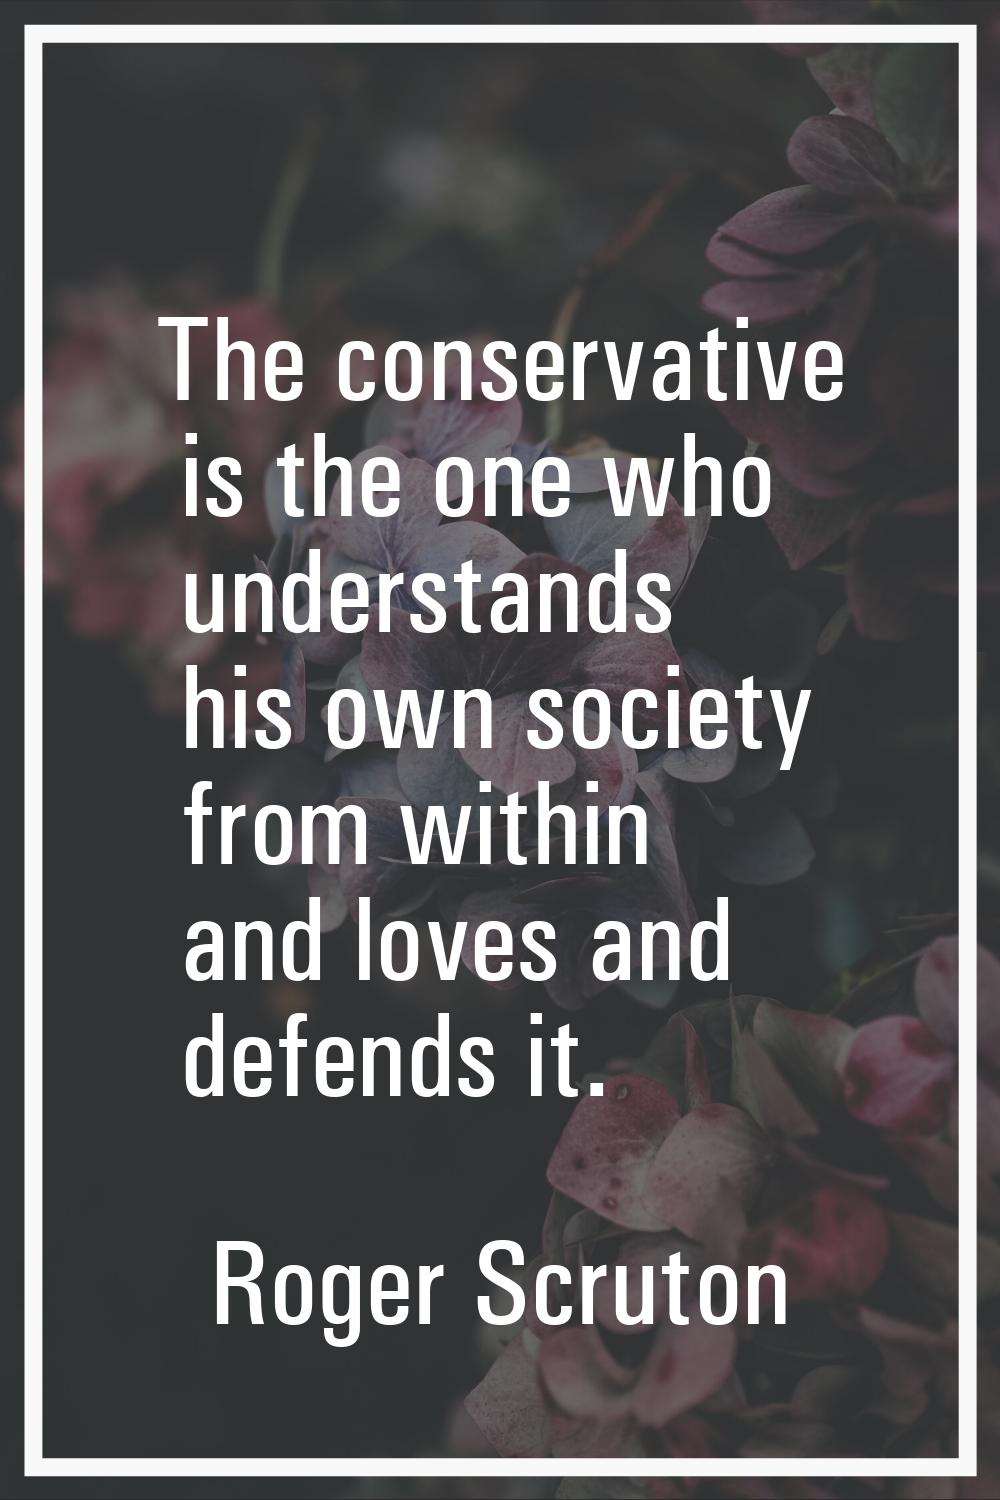 The conservative is the one who understands his own society from within and loves and defends it.